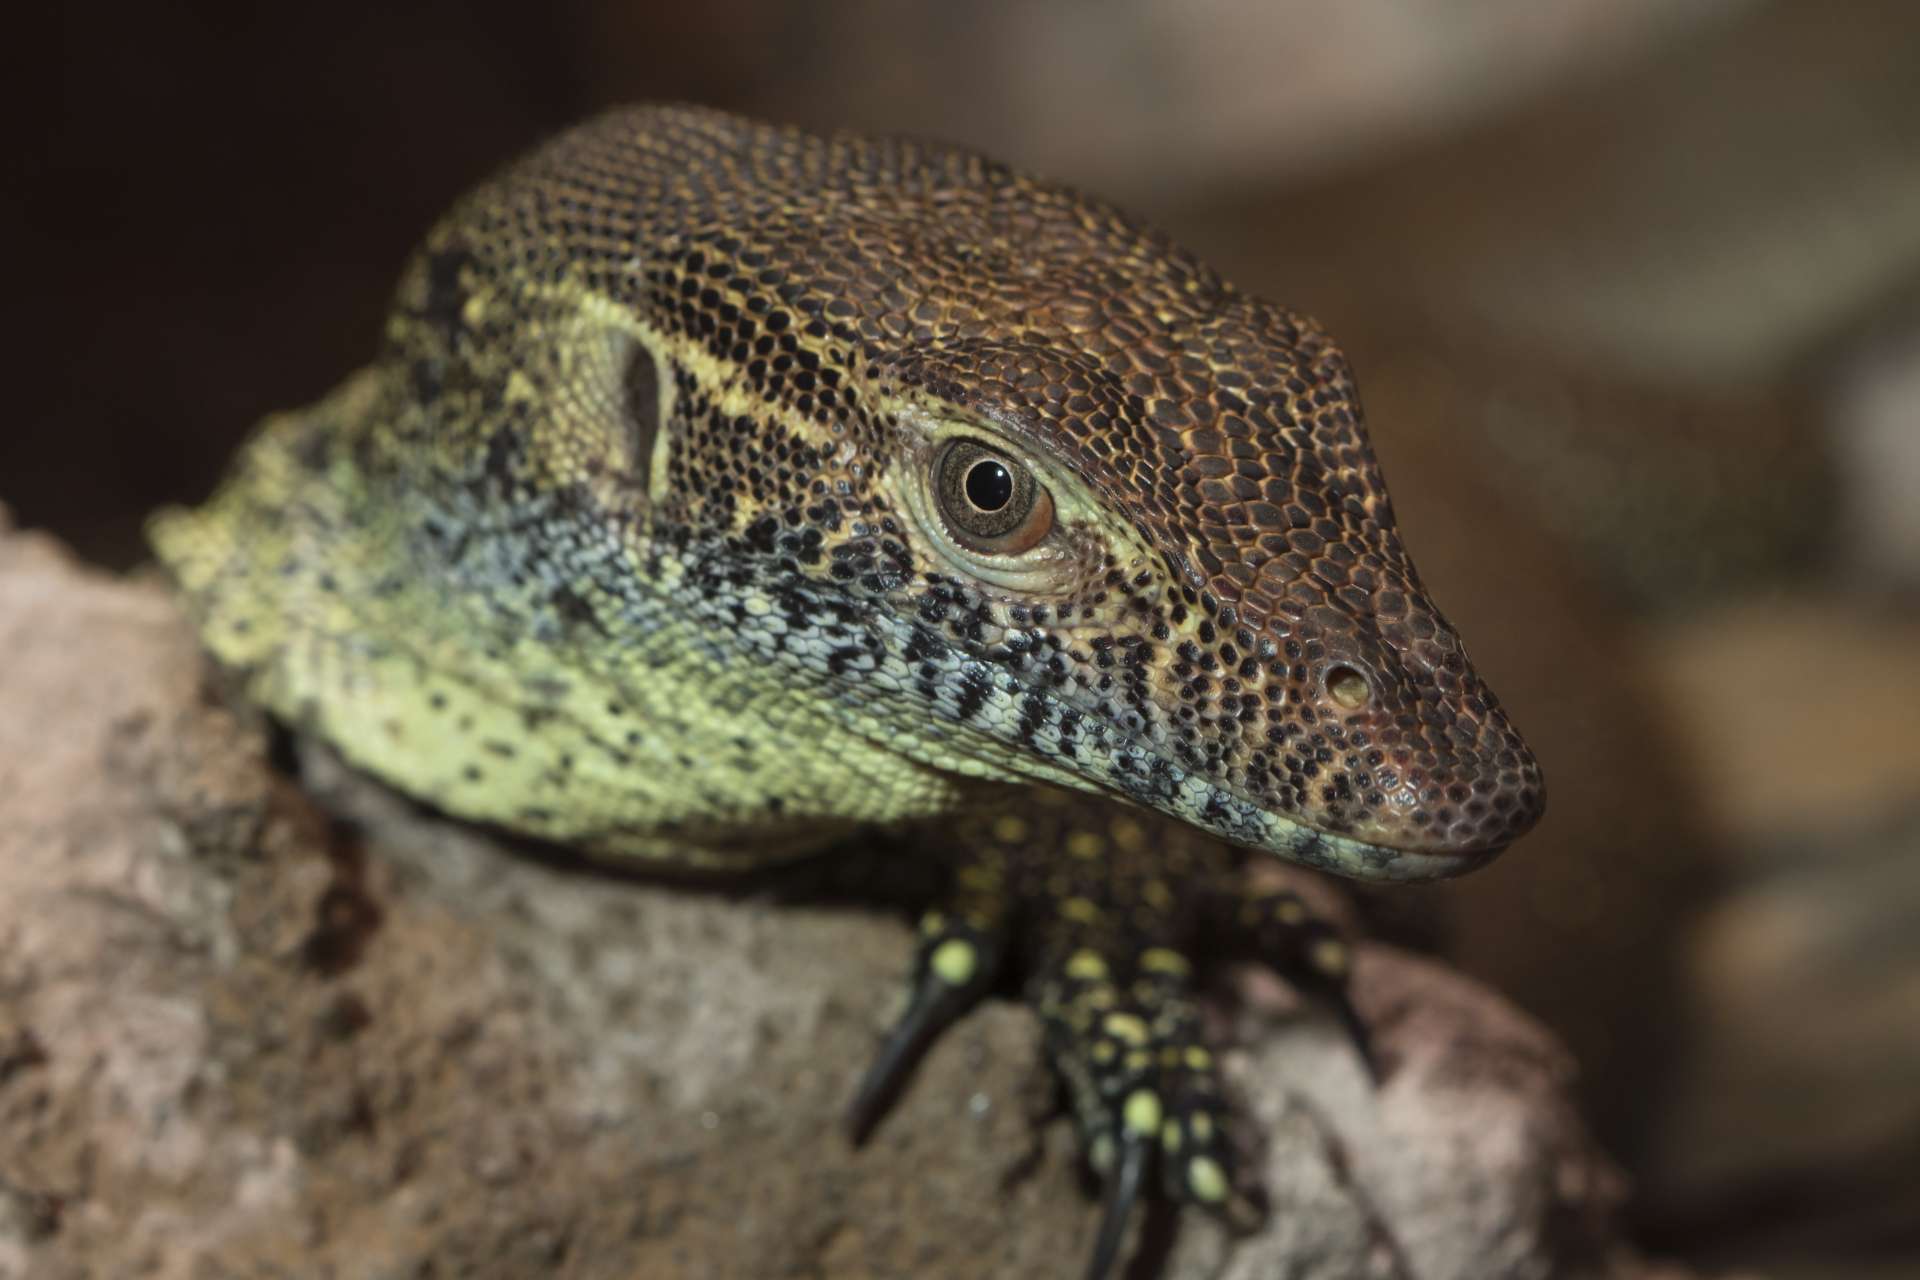 Cold-blooded: What's it mean? - Zoo Atlanta